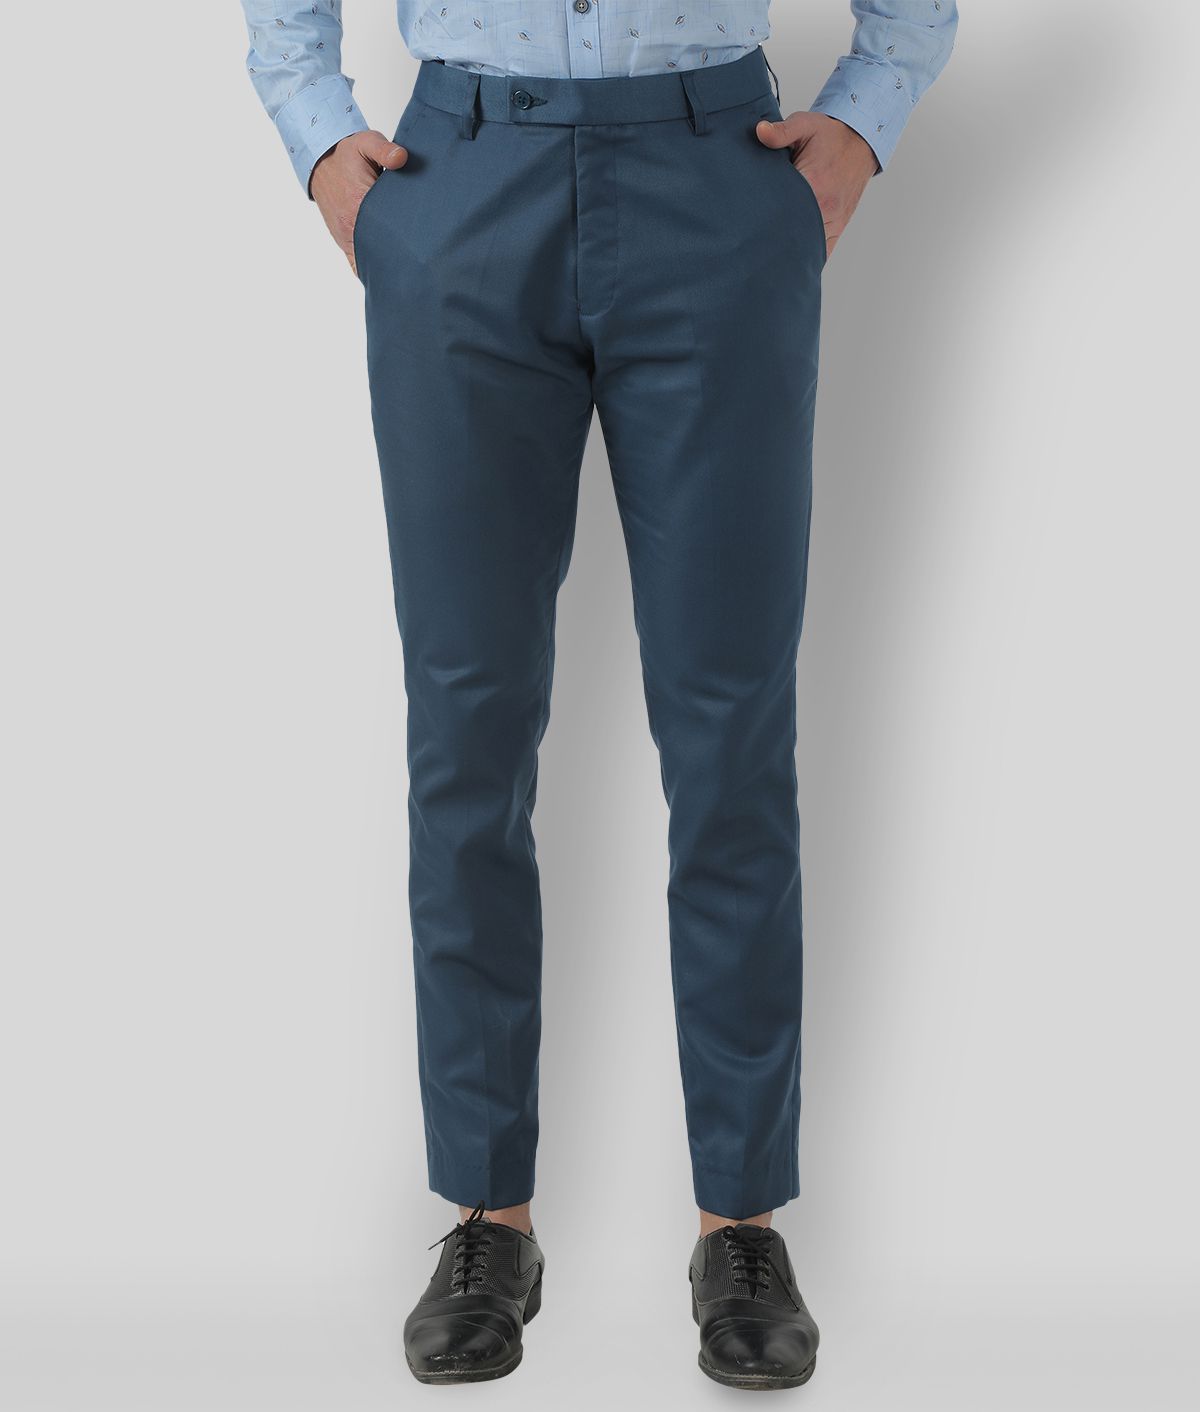     			Inspire Clothing Inspiration - Blue Polycotton Slim - Fit Men's Formal Pants ( Pack of 1 )